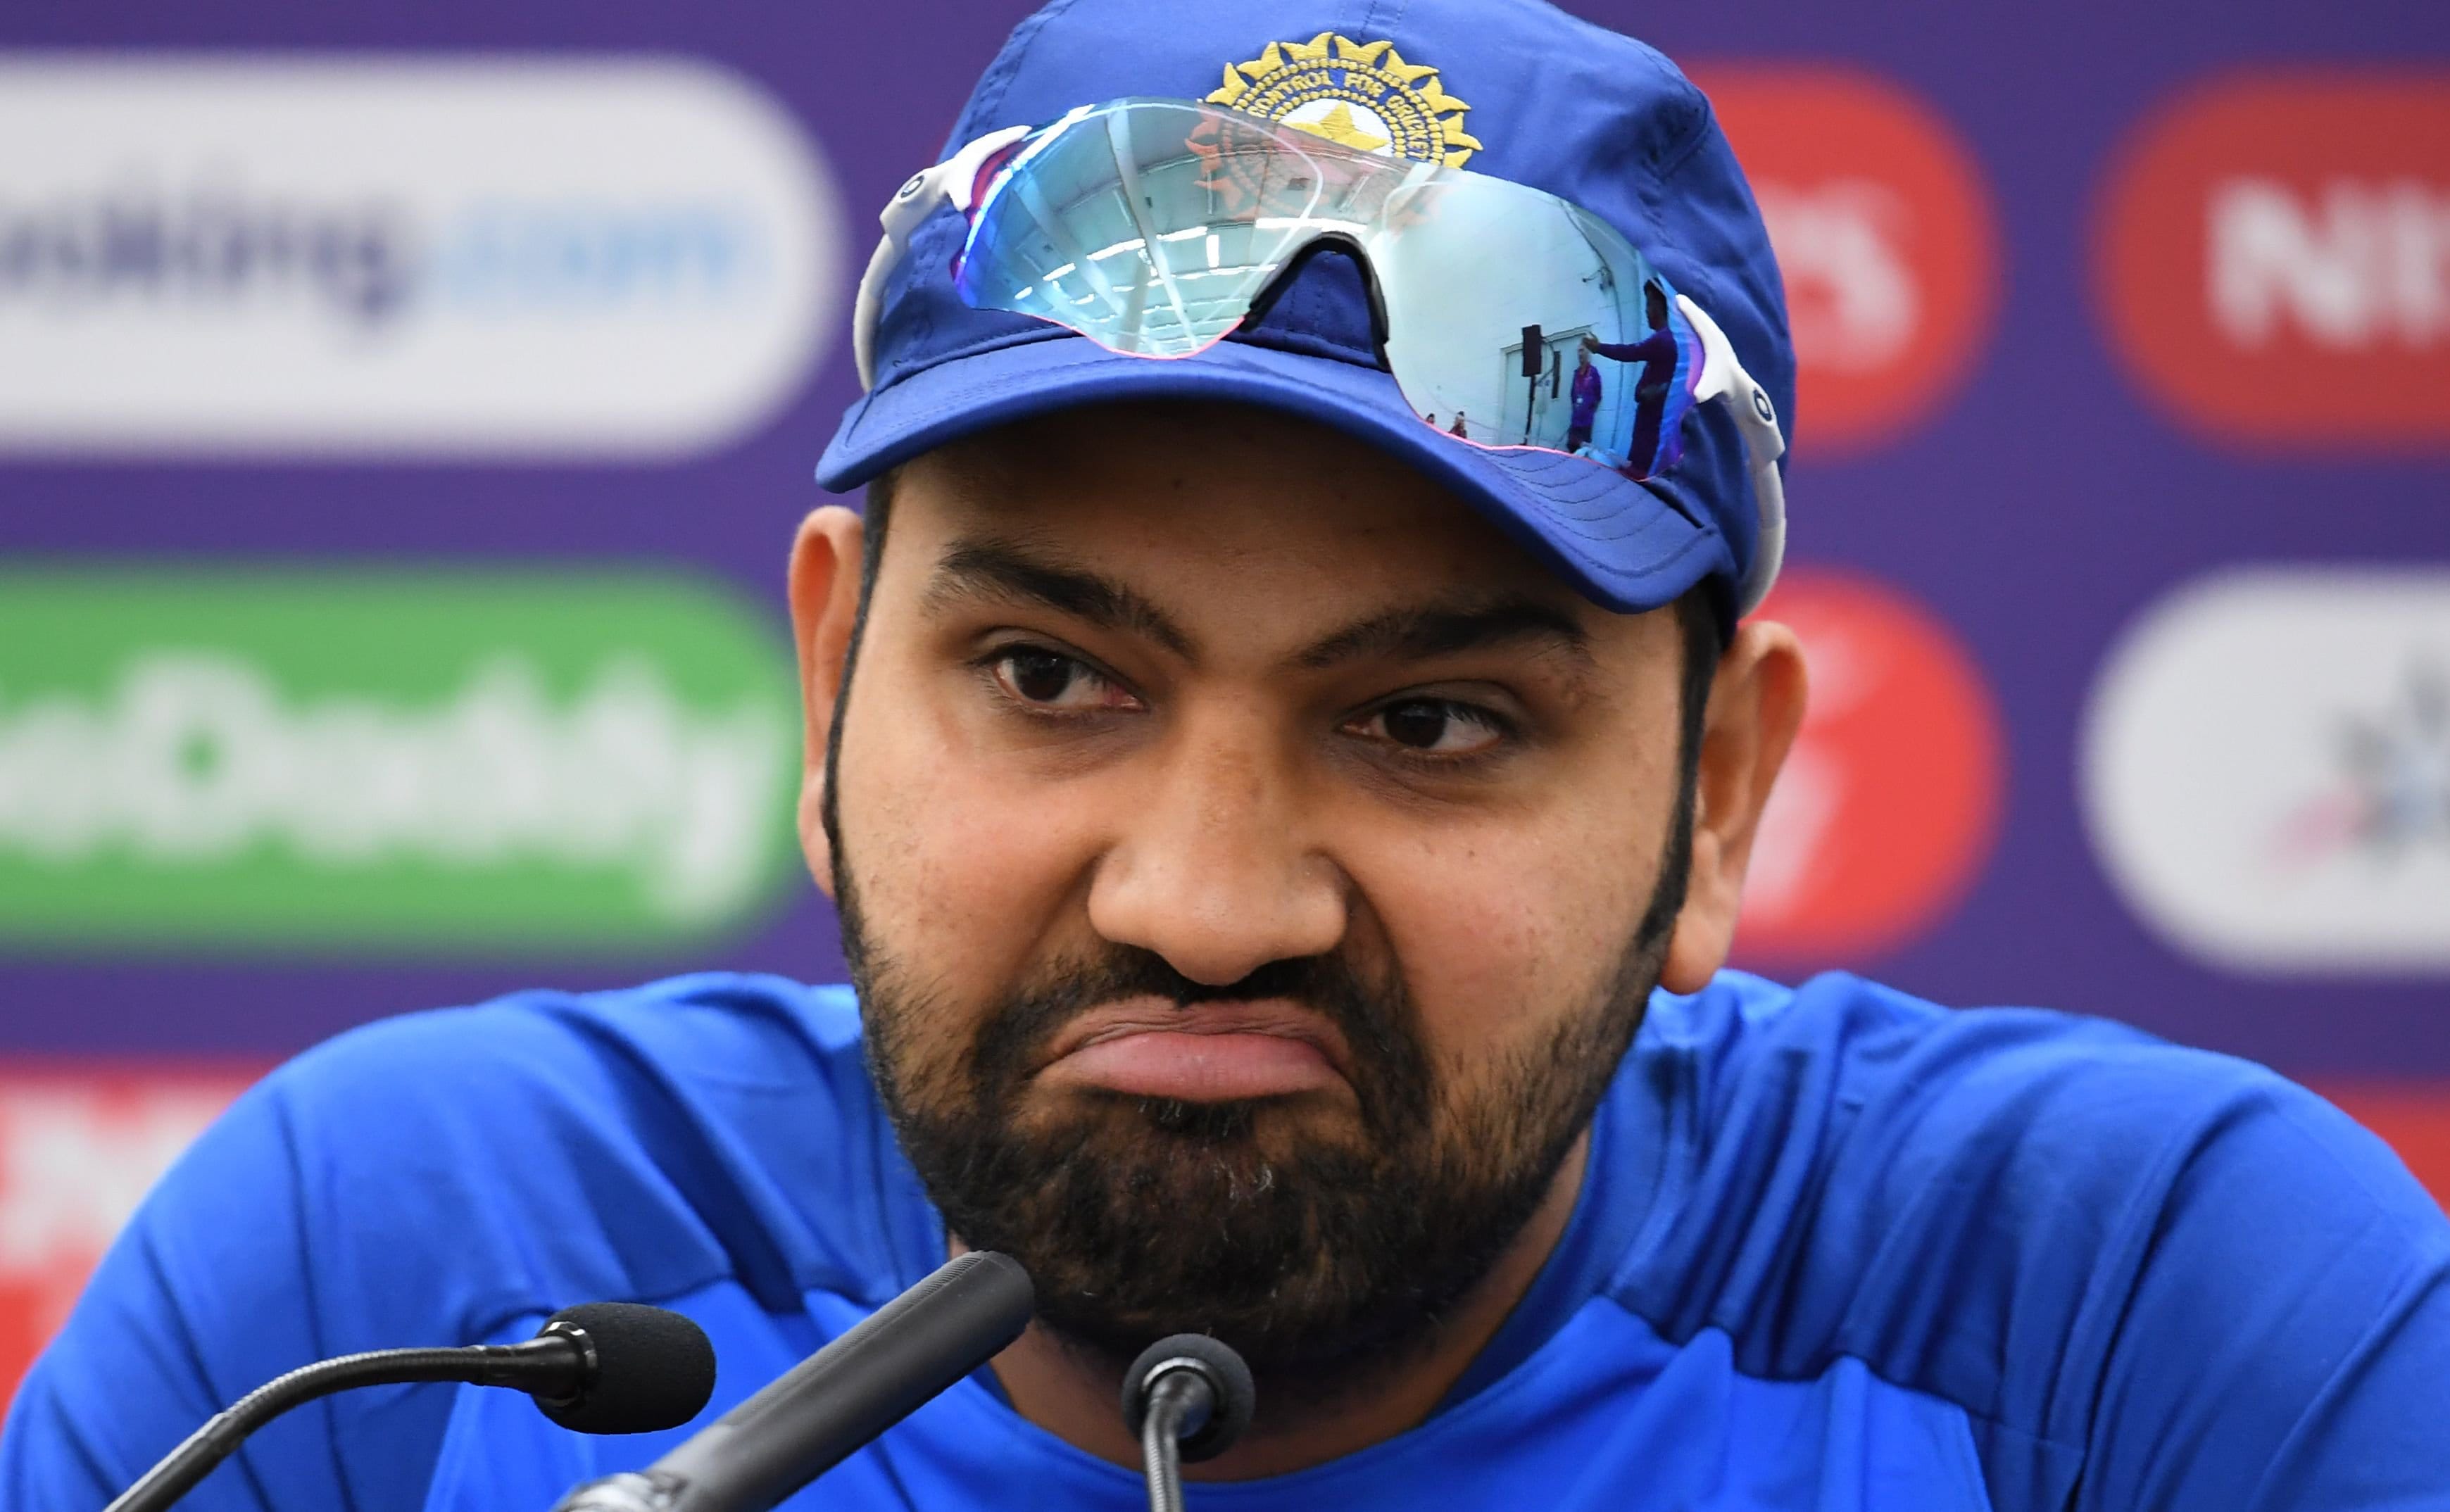 Rohit Sharma Impressed At A Press Conference